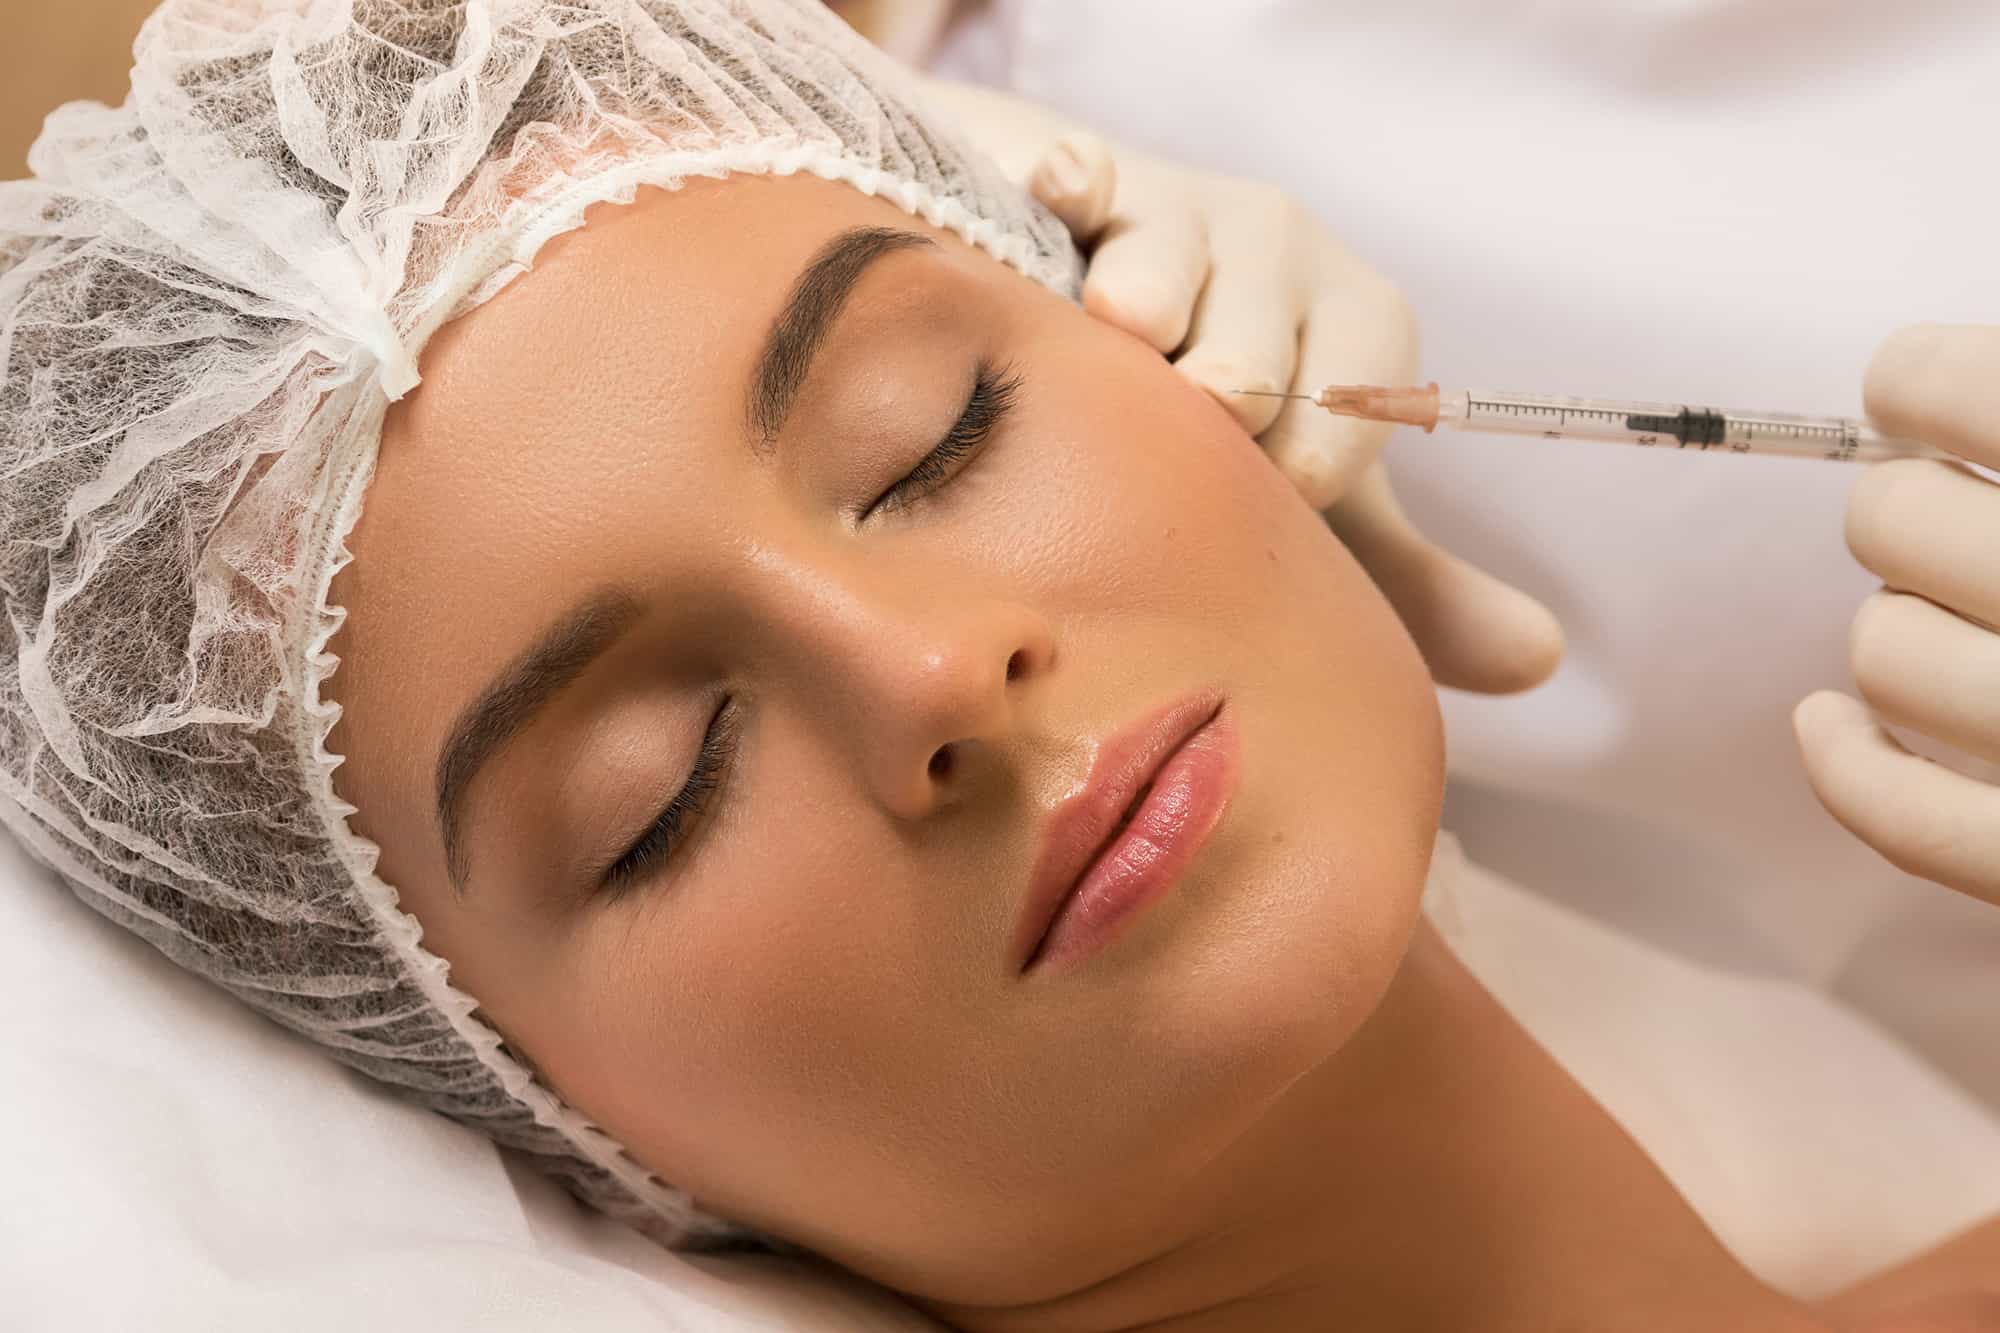 Botox Chattanooga Introduces New Injectable Treatments to Enhance Facial Contours and Restore Youthful Appearance